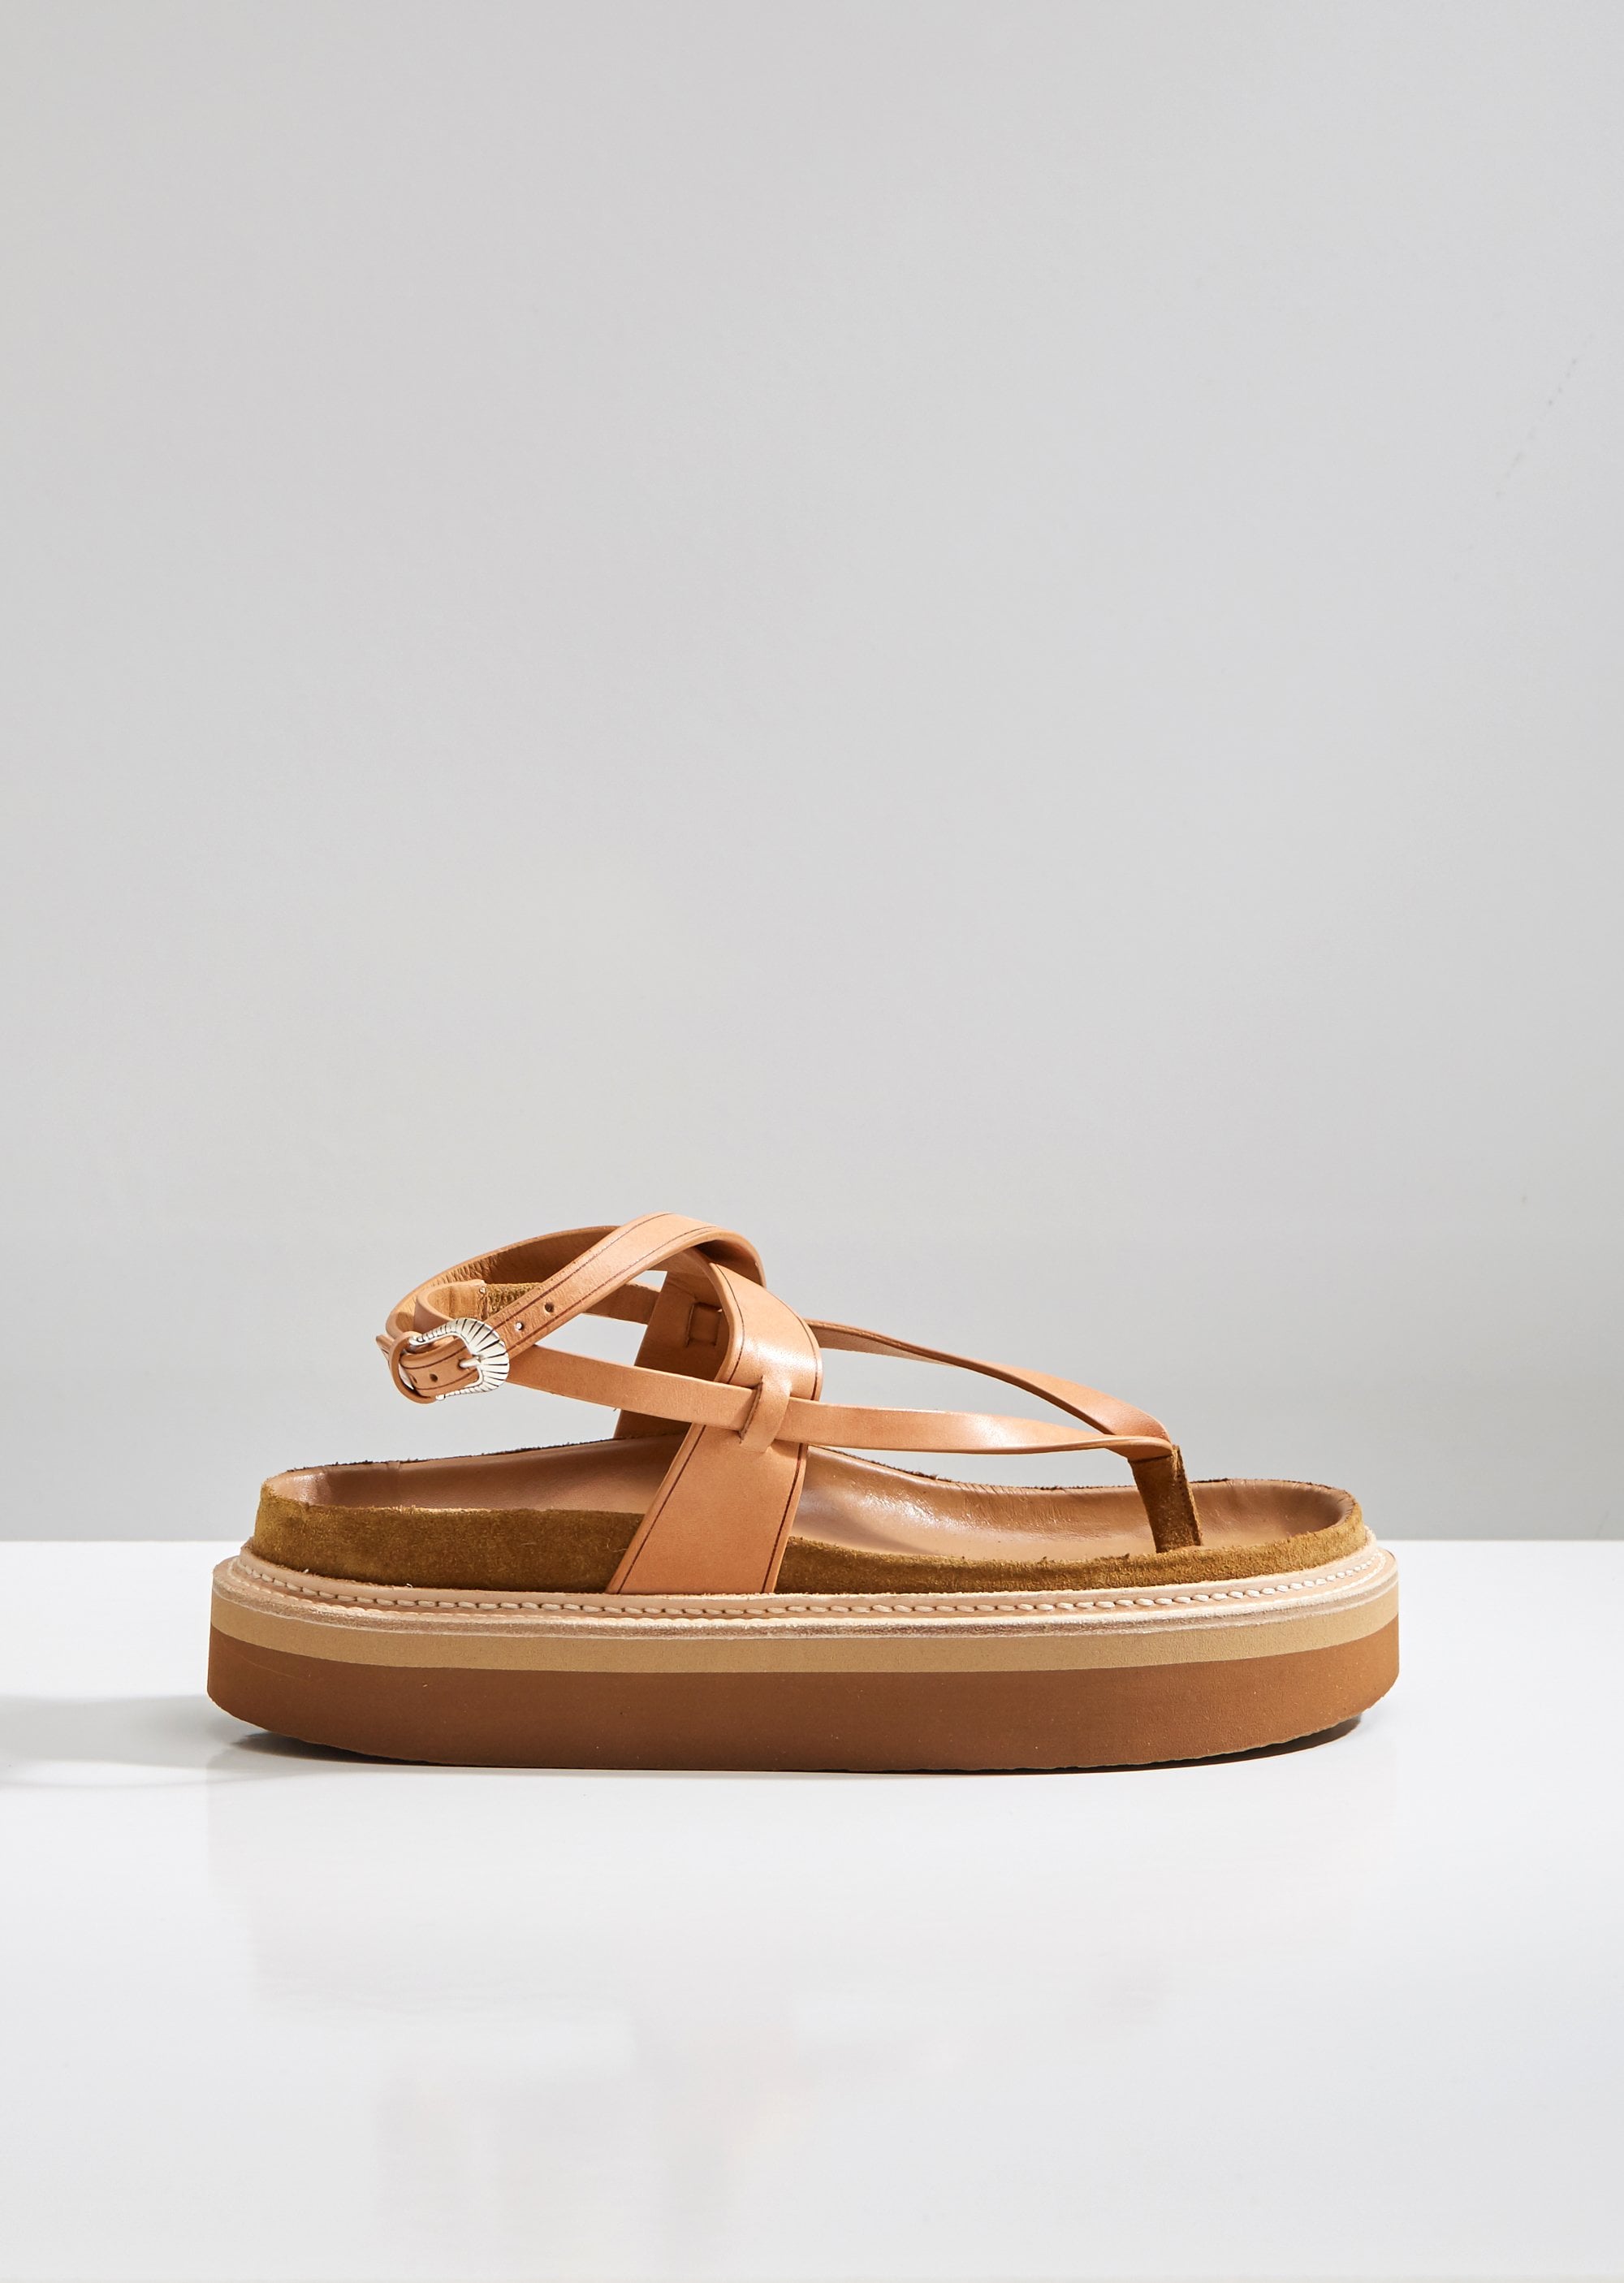 must have sandals for summer 2019